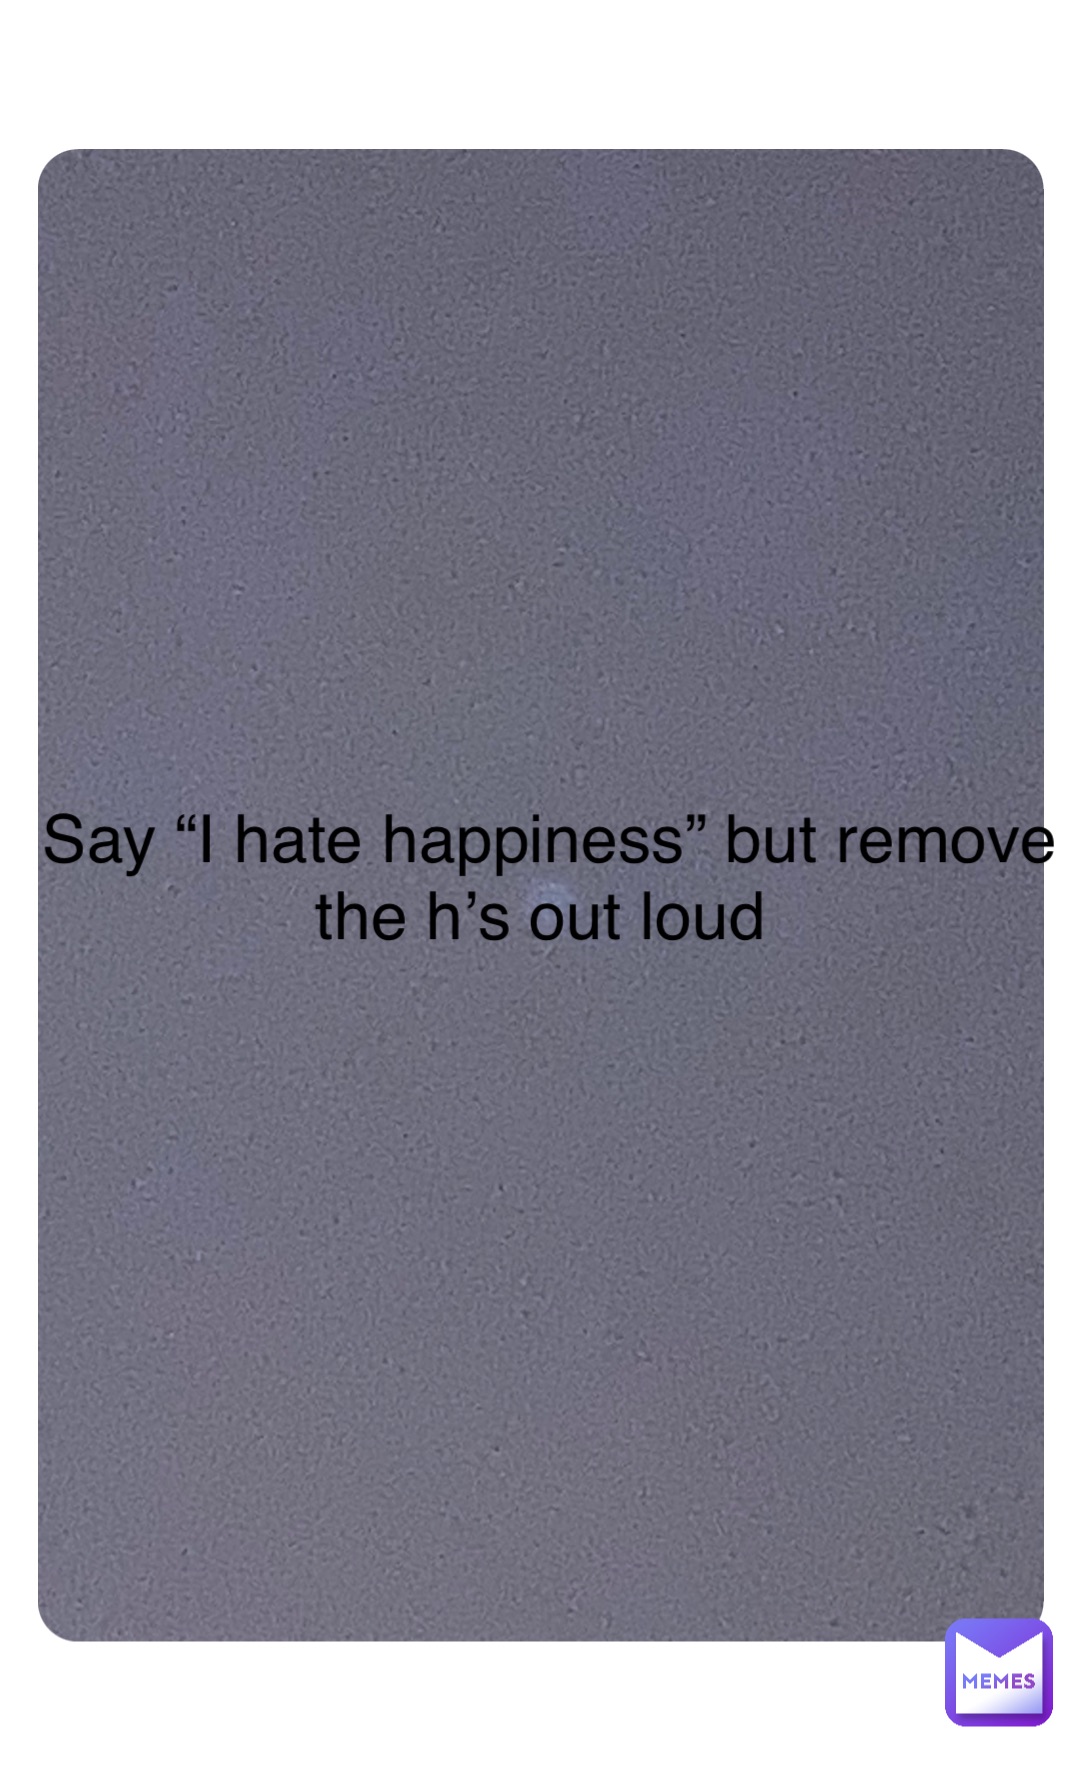 Double tap to edit Say “I hate happiness” but remove the h’s out loud